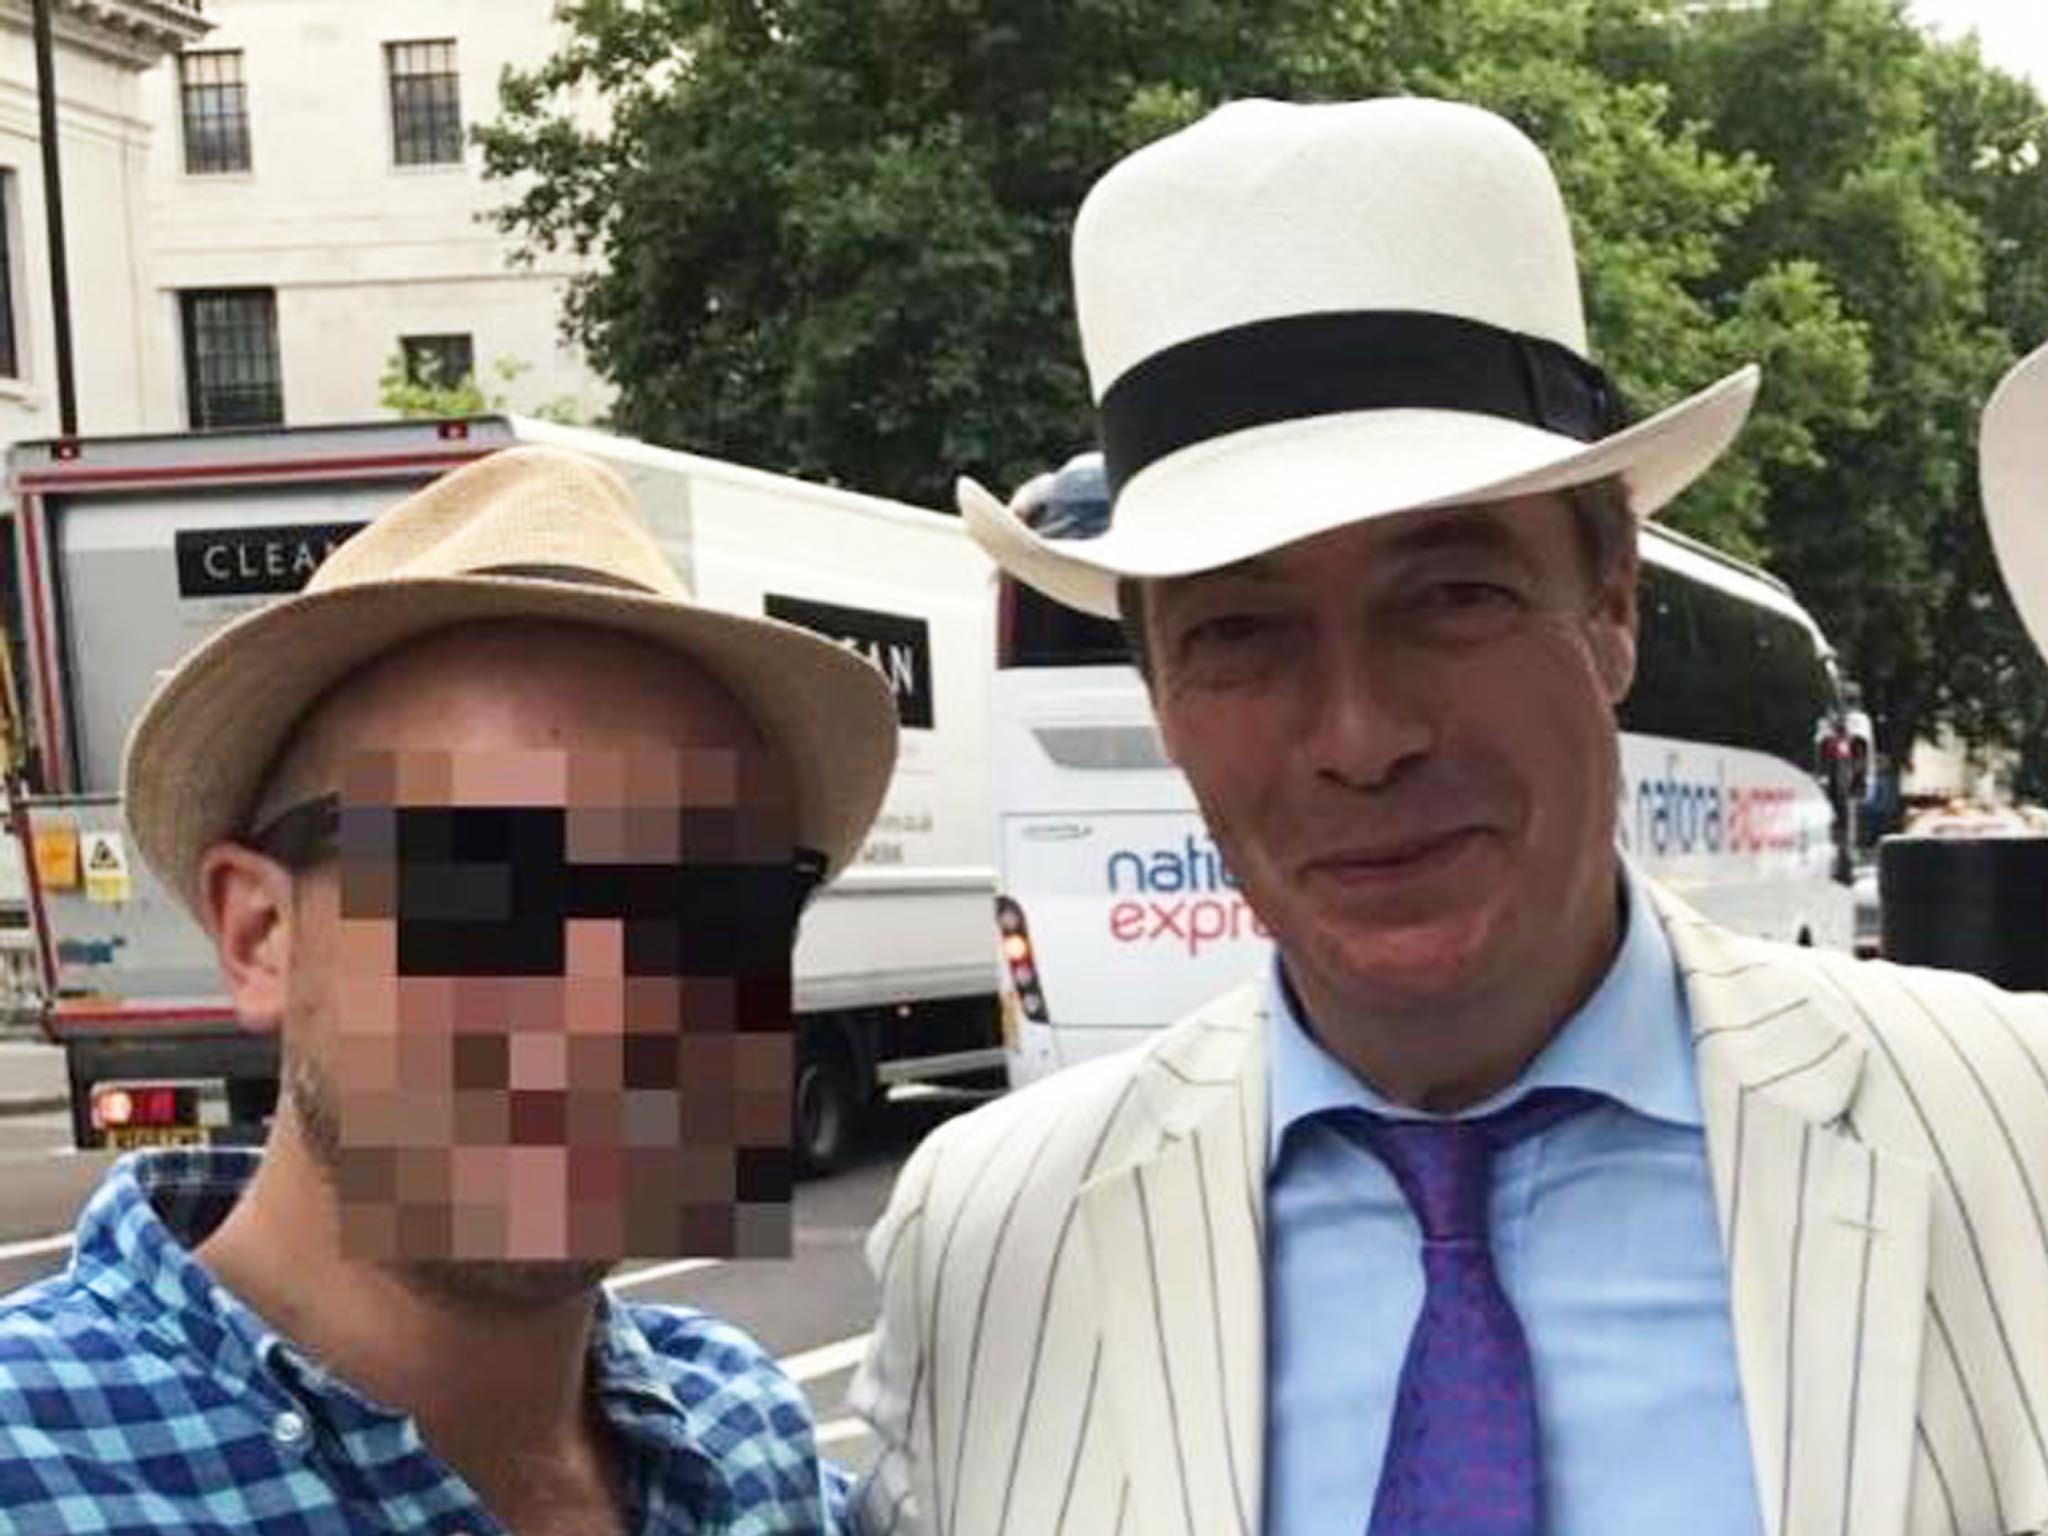 Nigel Farage posed for photographs with cricket fans outside Lord's before claiming uber drivers "are not our people"